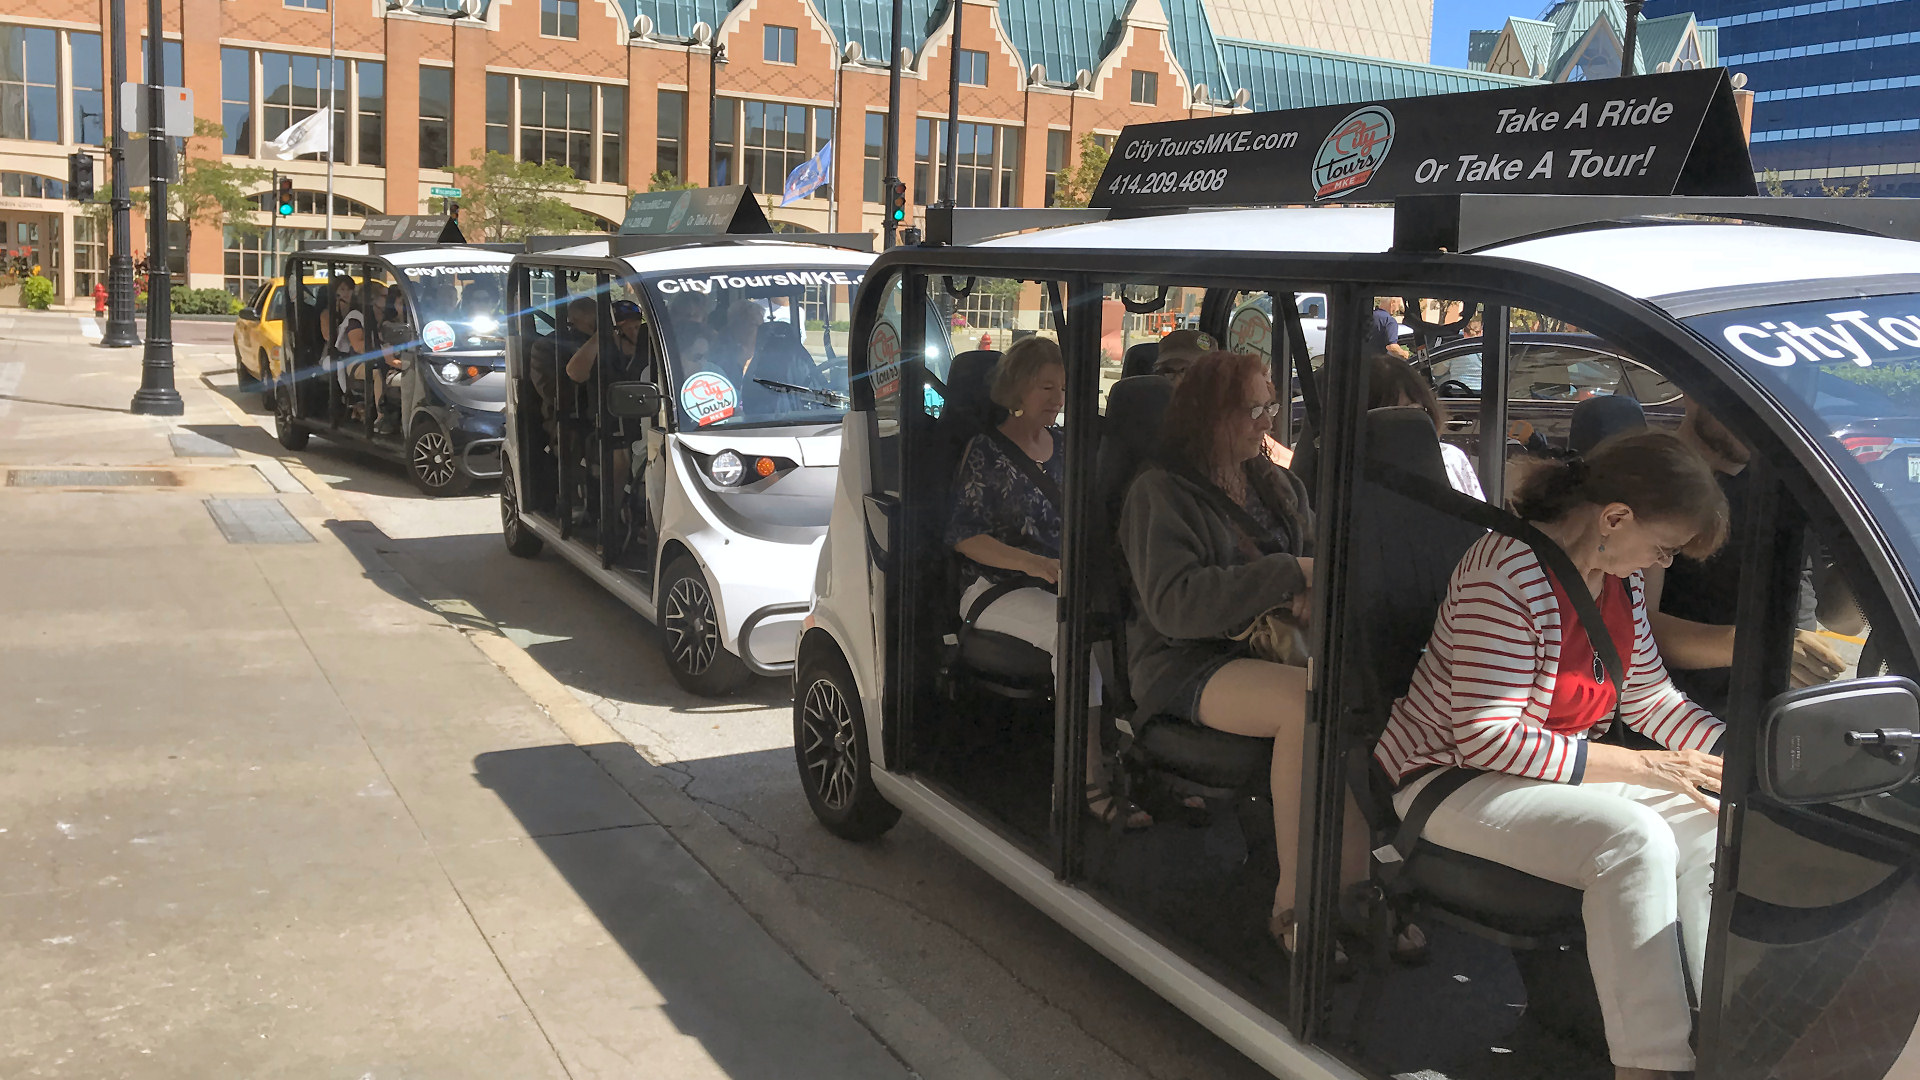 3 electric cruisers ready for a City Tours MKE experience - voted Best Tour of Milwaukee 2021